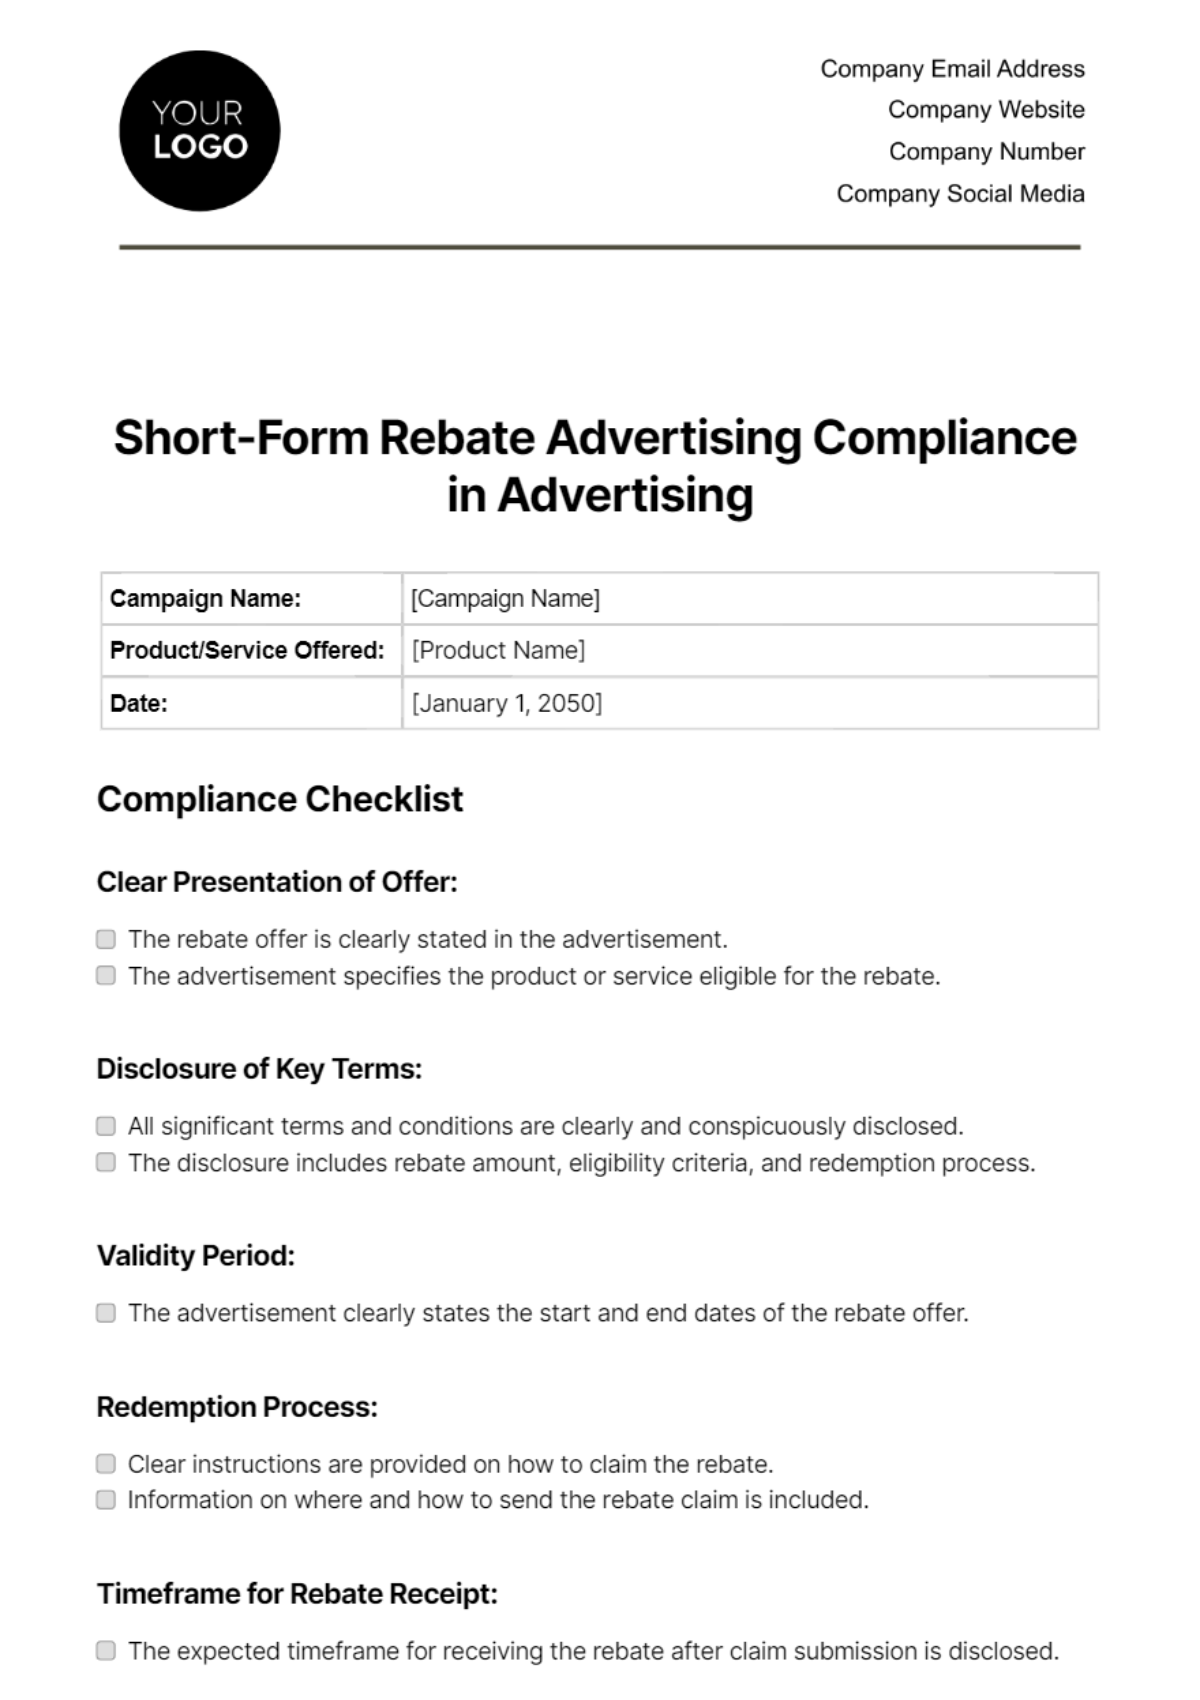 Short-Form Rebate Advertising Compliance in Advertising Template